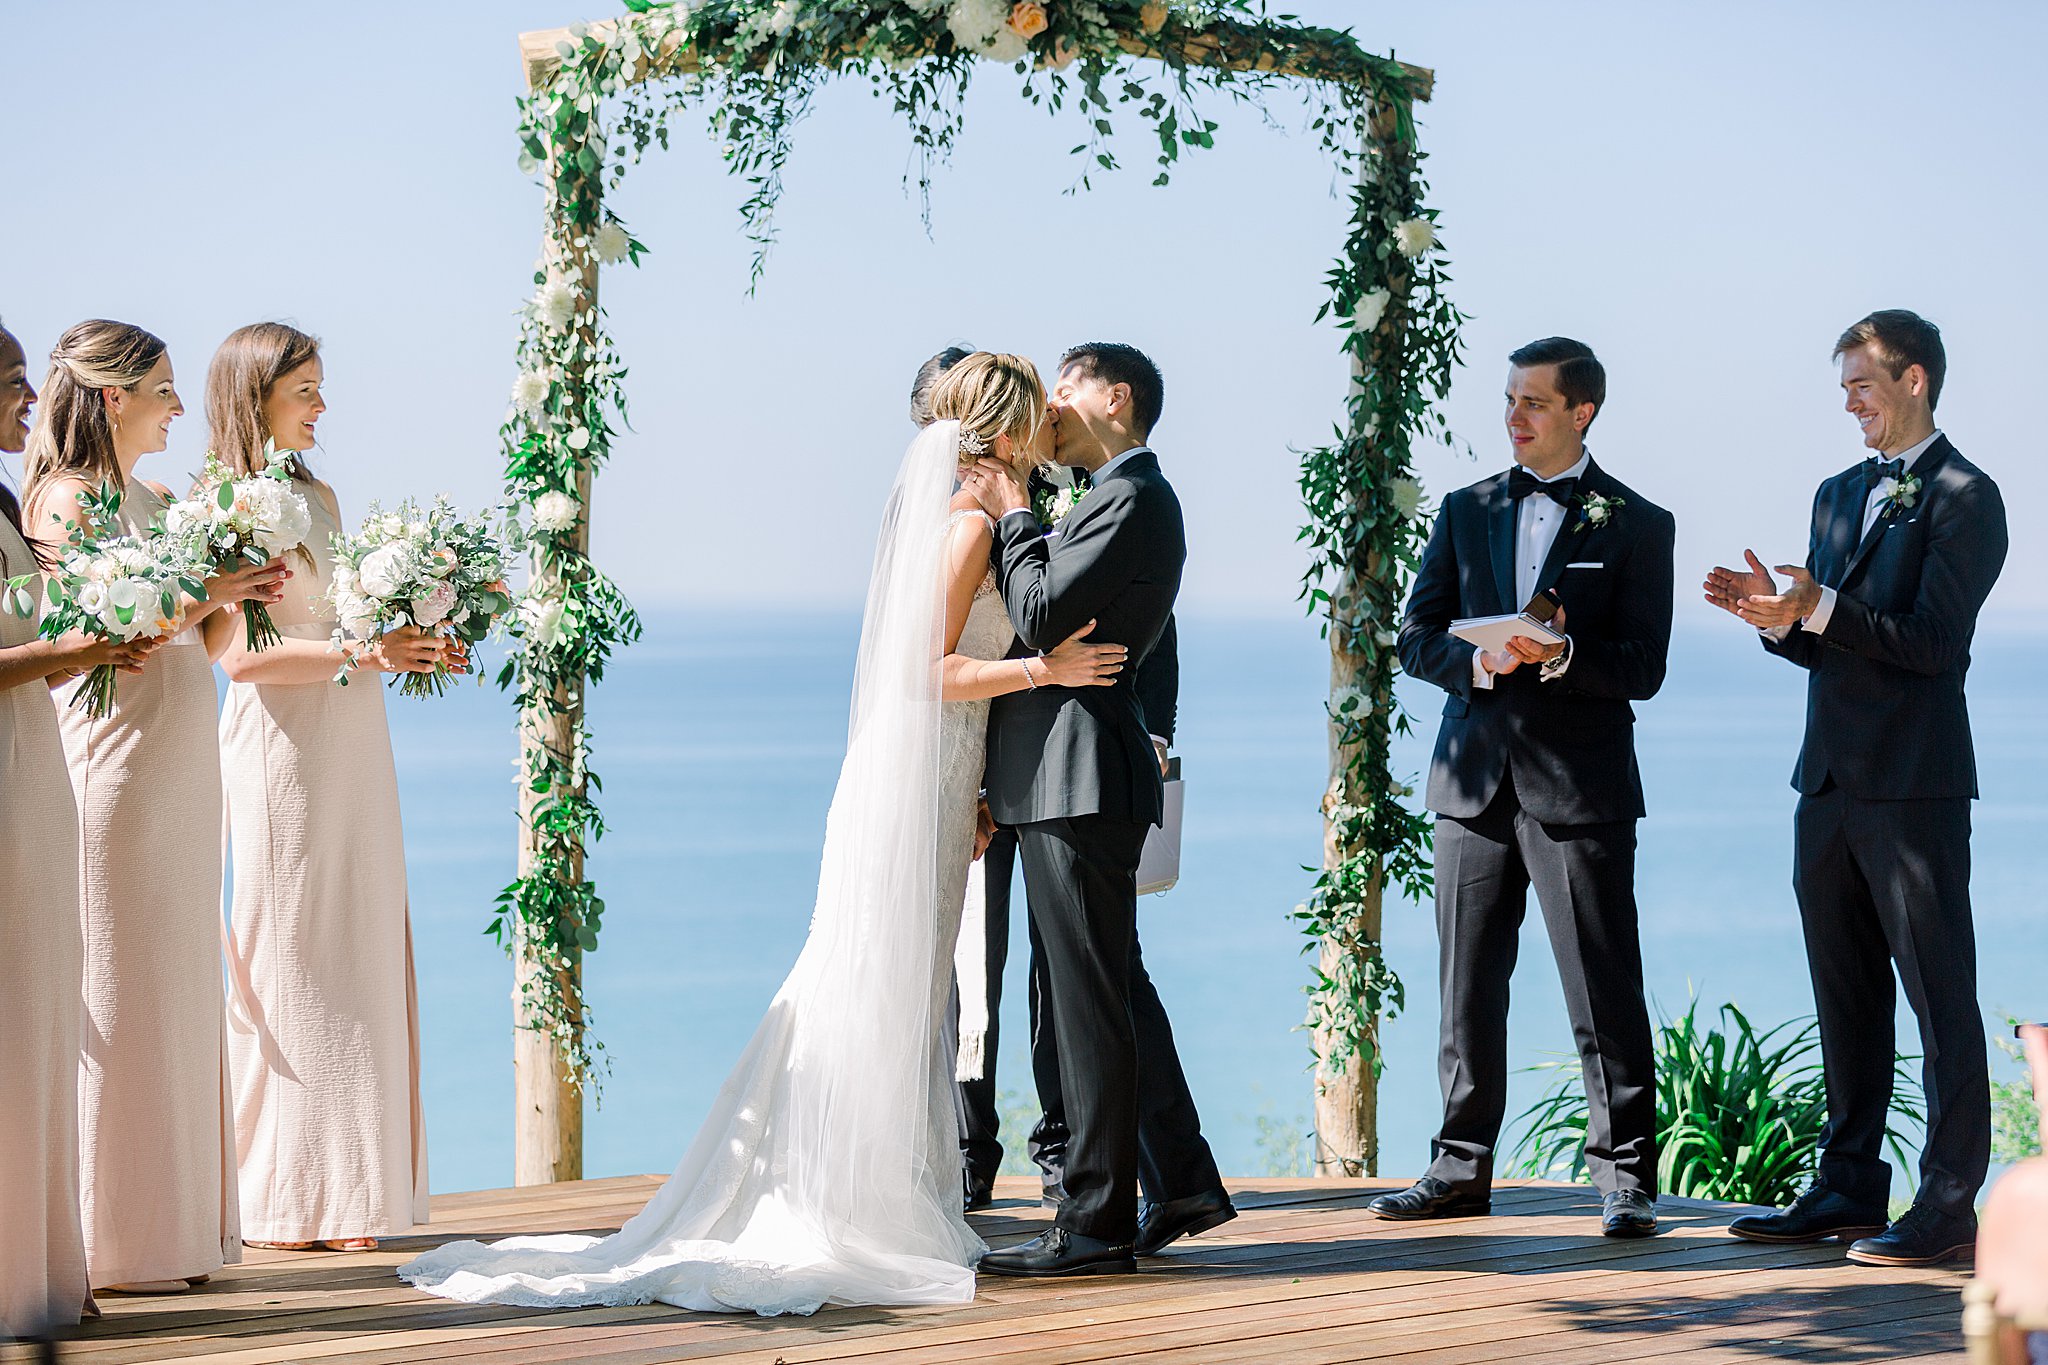 Bride and groom share first kiss during intimate Lake Michigan wedding ceremony.